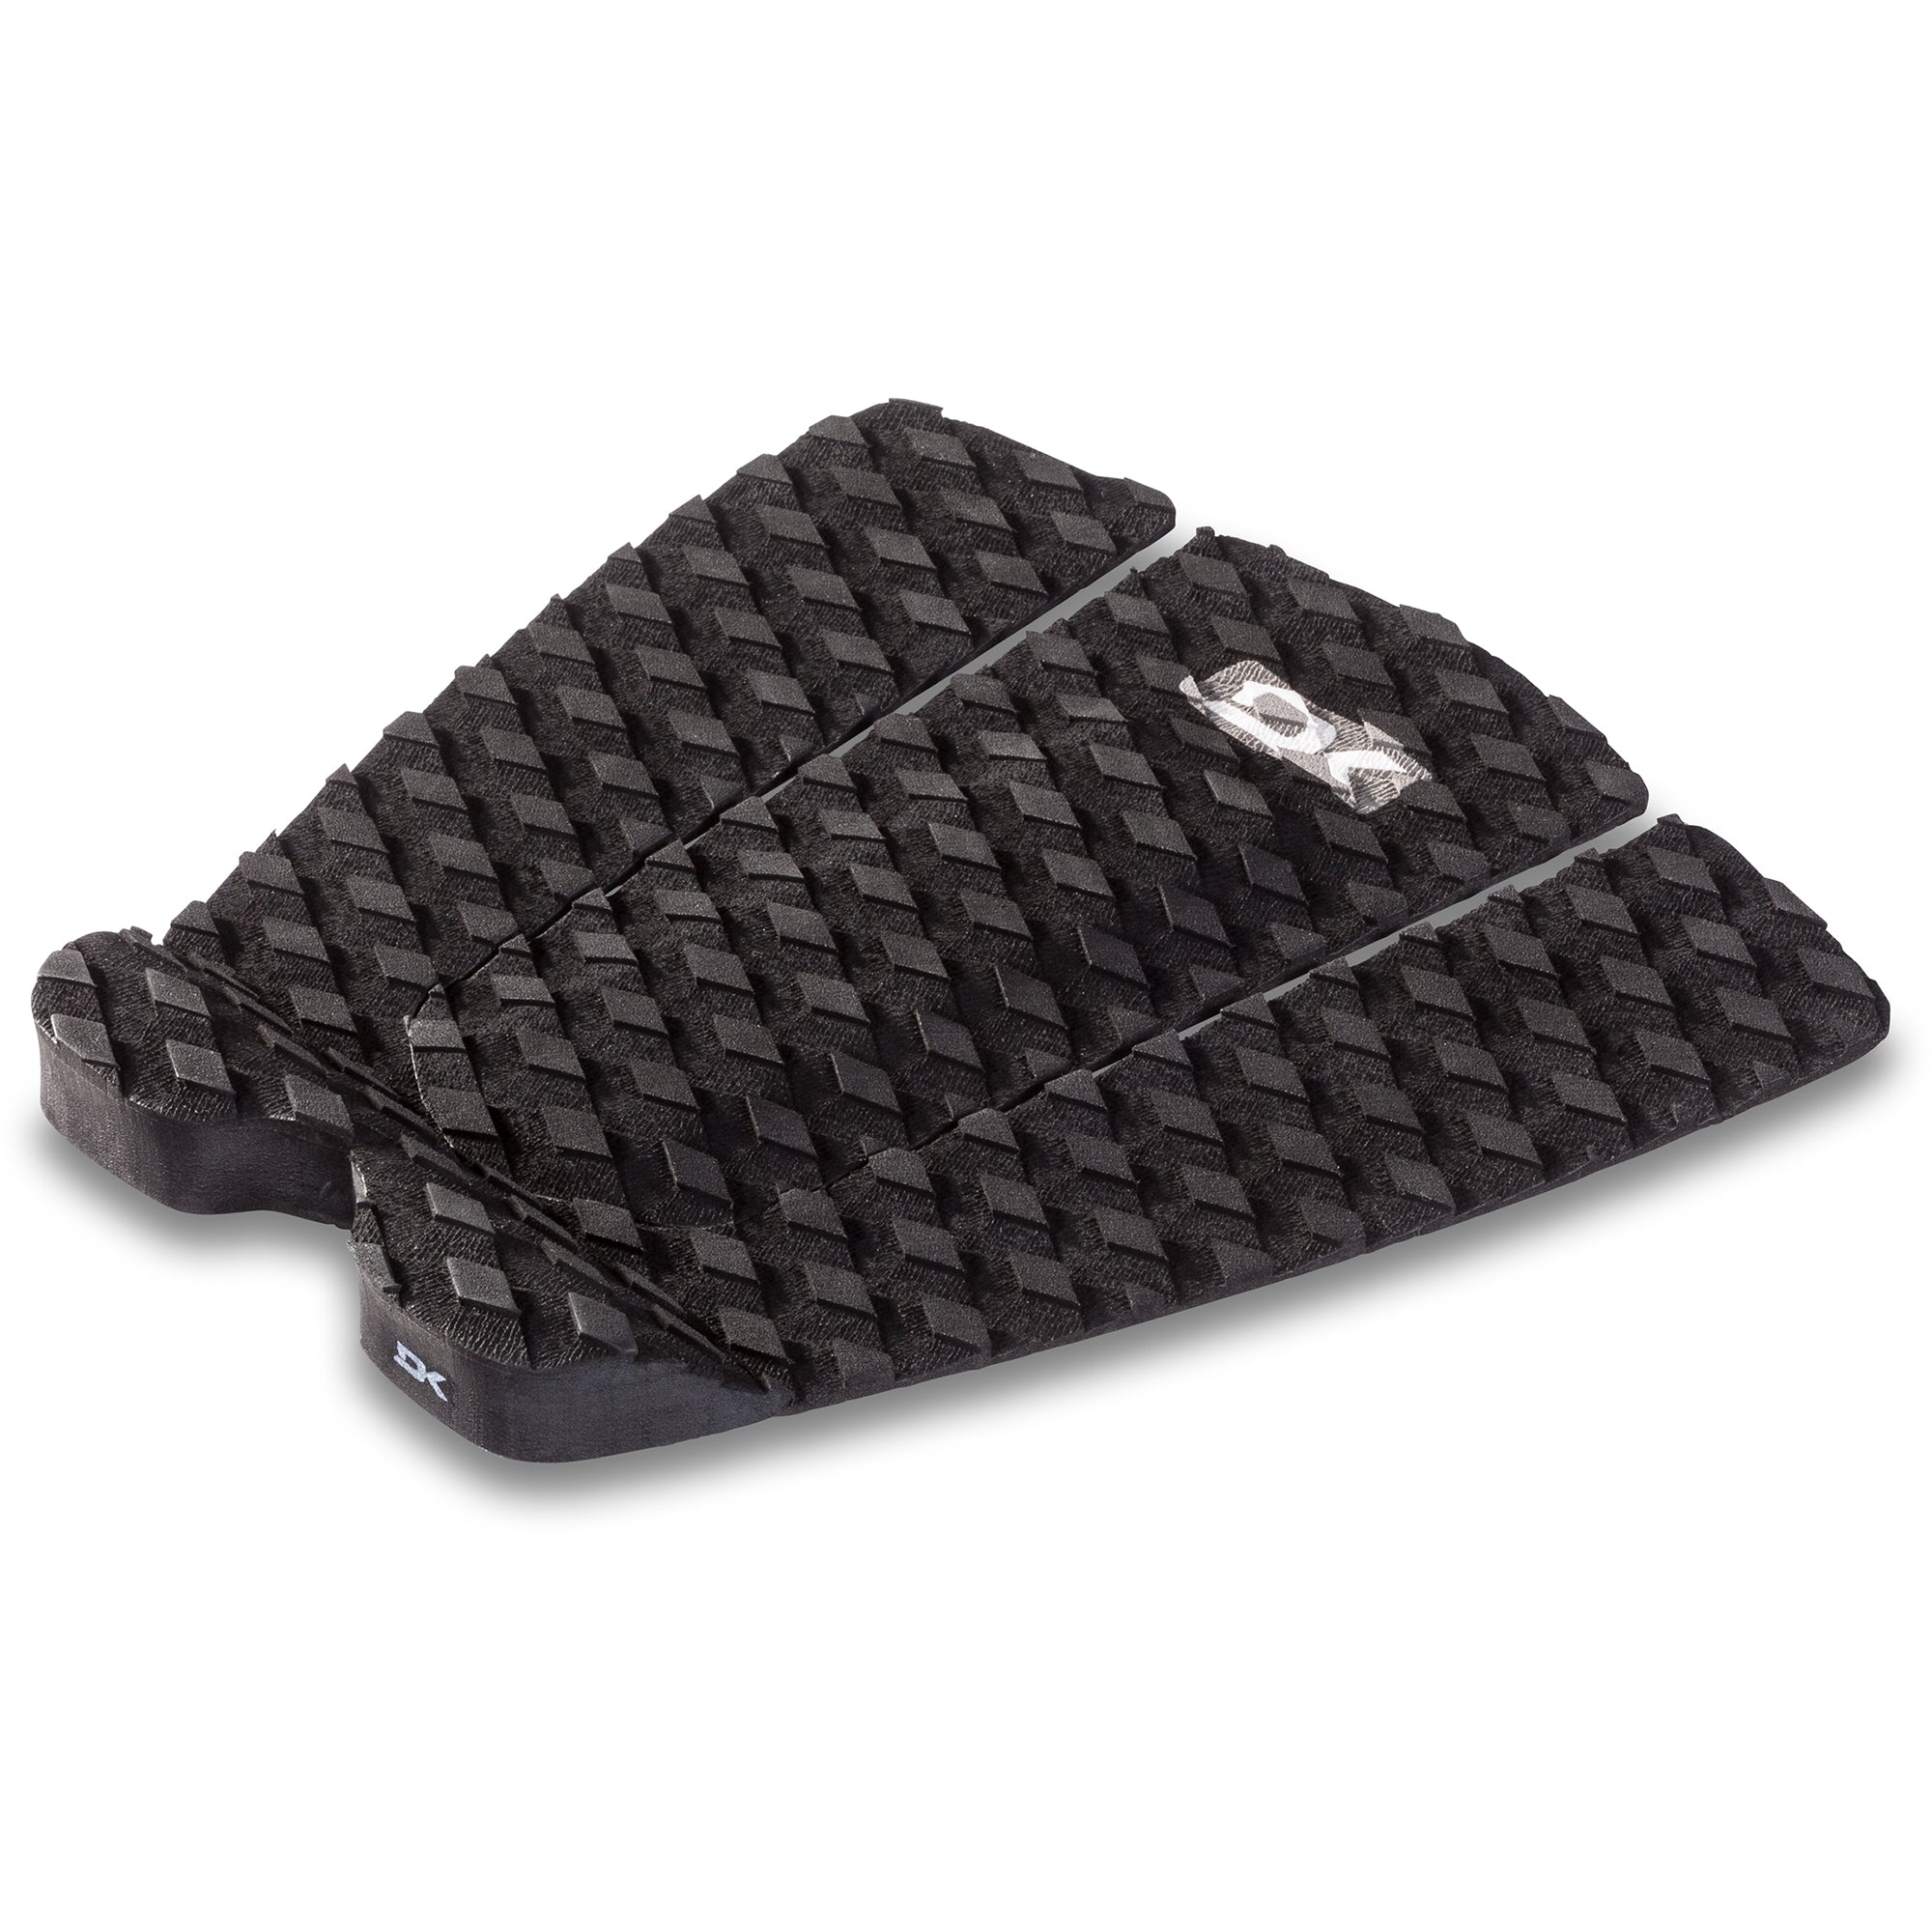 Dakine Andy Irons Pro Traction Pad 010-Black